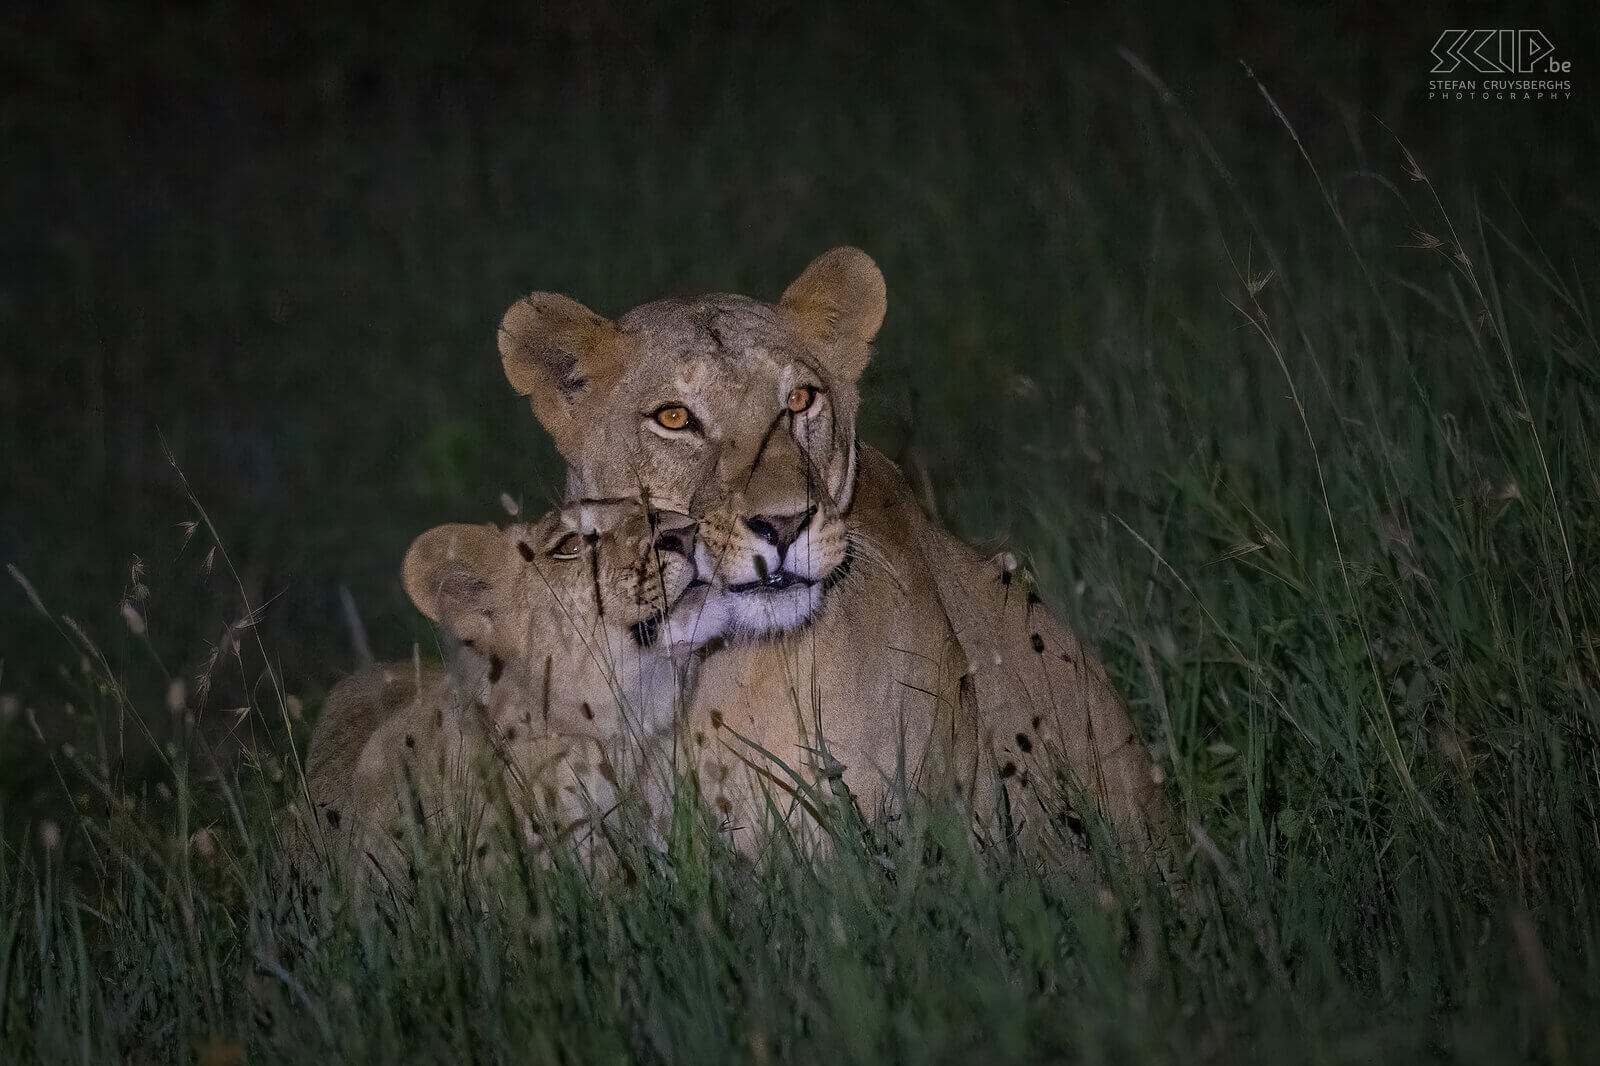 Solio - Lioness with cub During a final night game drive in Solio we were able to follow a lioness with some cubs. Night game drives in Solio take place in the Ranch part. It was a fantastic end to our trip. Stefan Cruysberghs